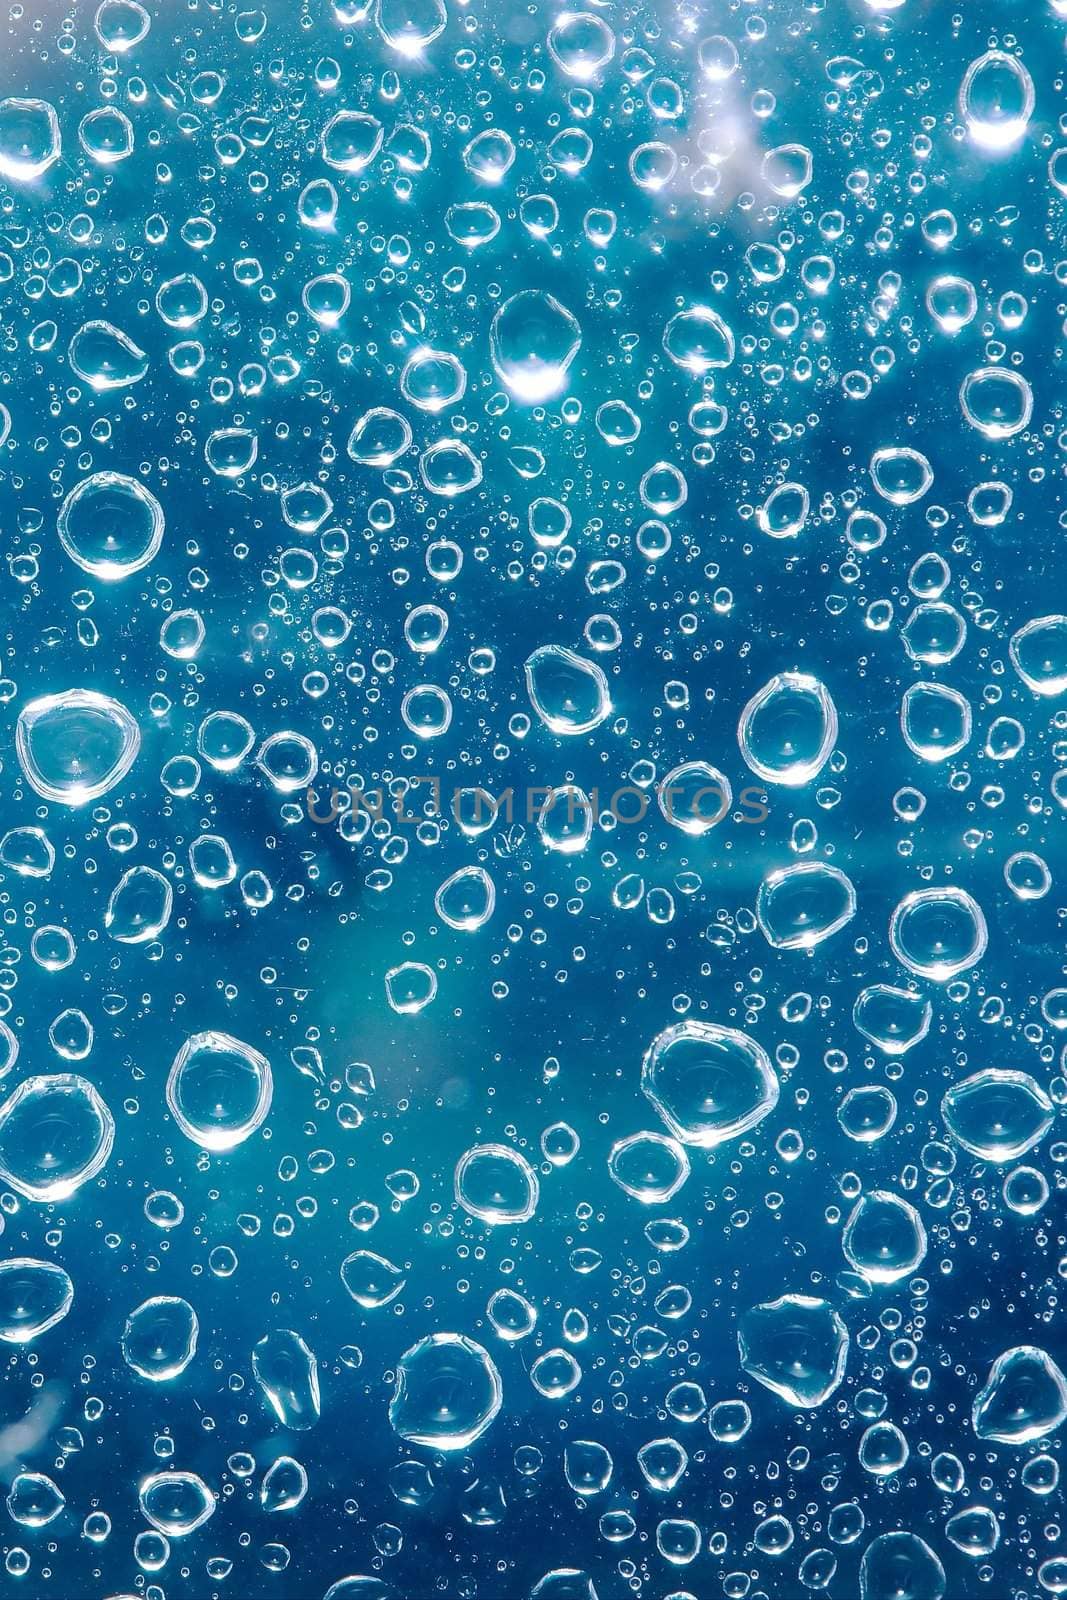 Shiny water droplets on a transparent surface